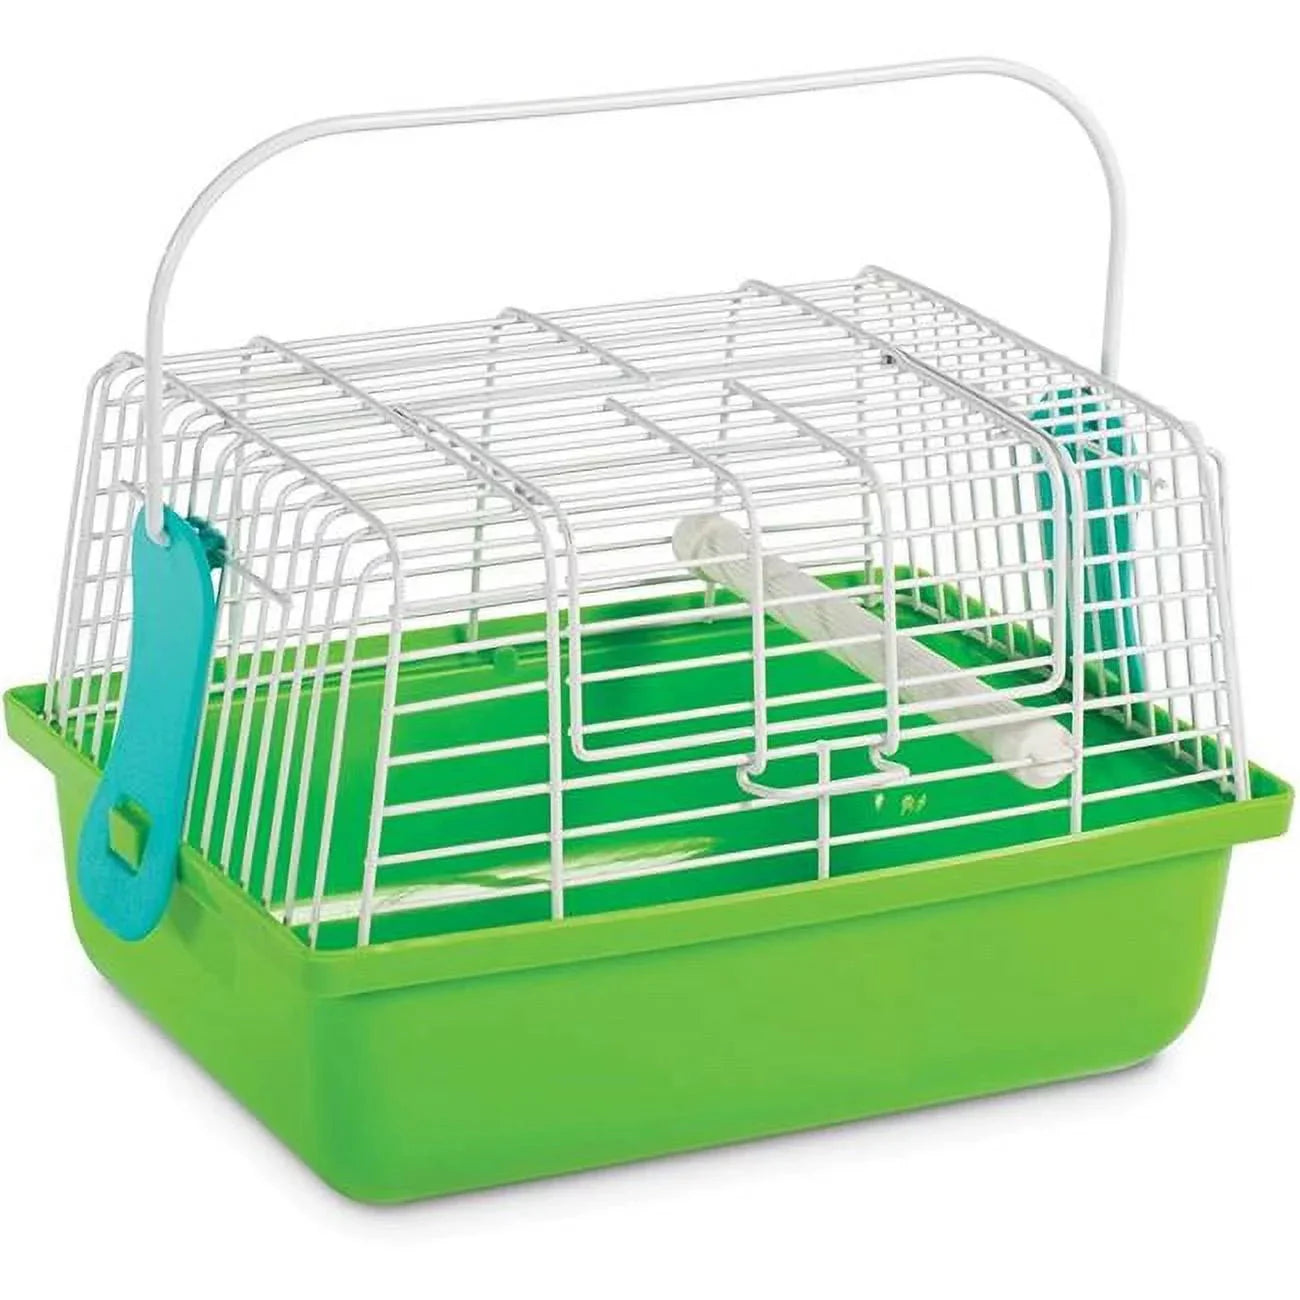 Wholesale prices with free shipping all over United States Prevue Pet Products Travel Cage for Birds and Small Animals, Pink - Steven Deals